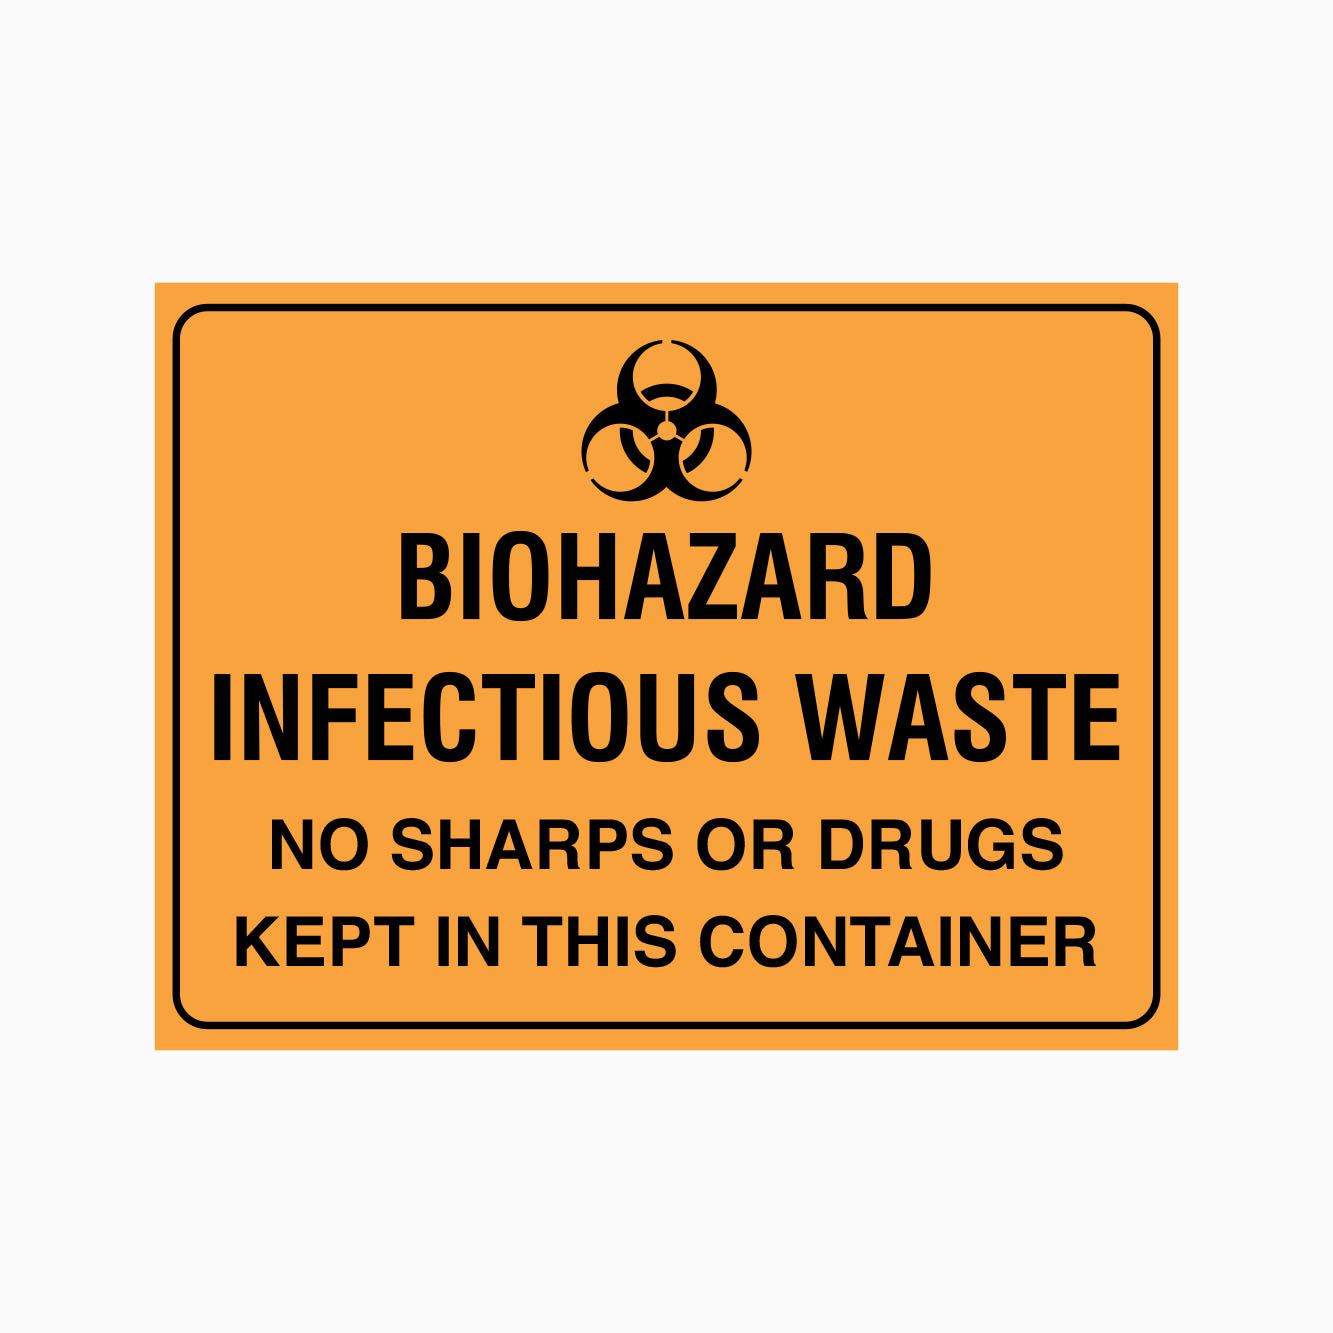 BIOHAZARD INFECTIOUS WASTE SIGN NO SHARPS OR DRUGS KEPT IN THIS CONTAINER SIGN